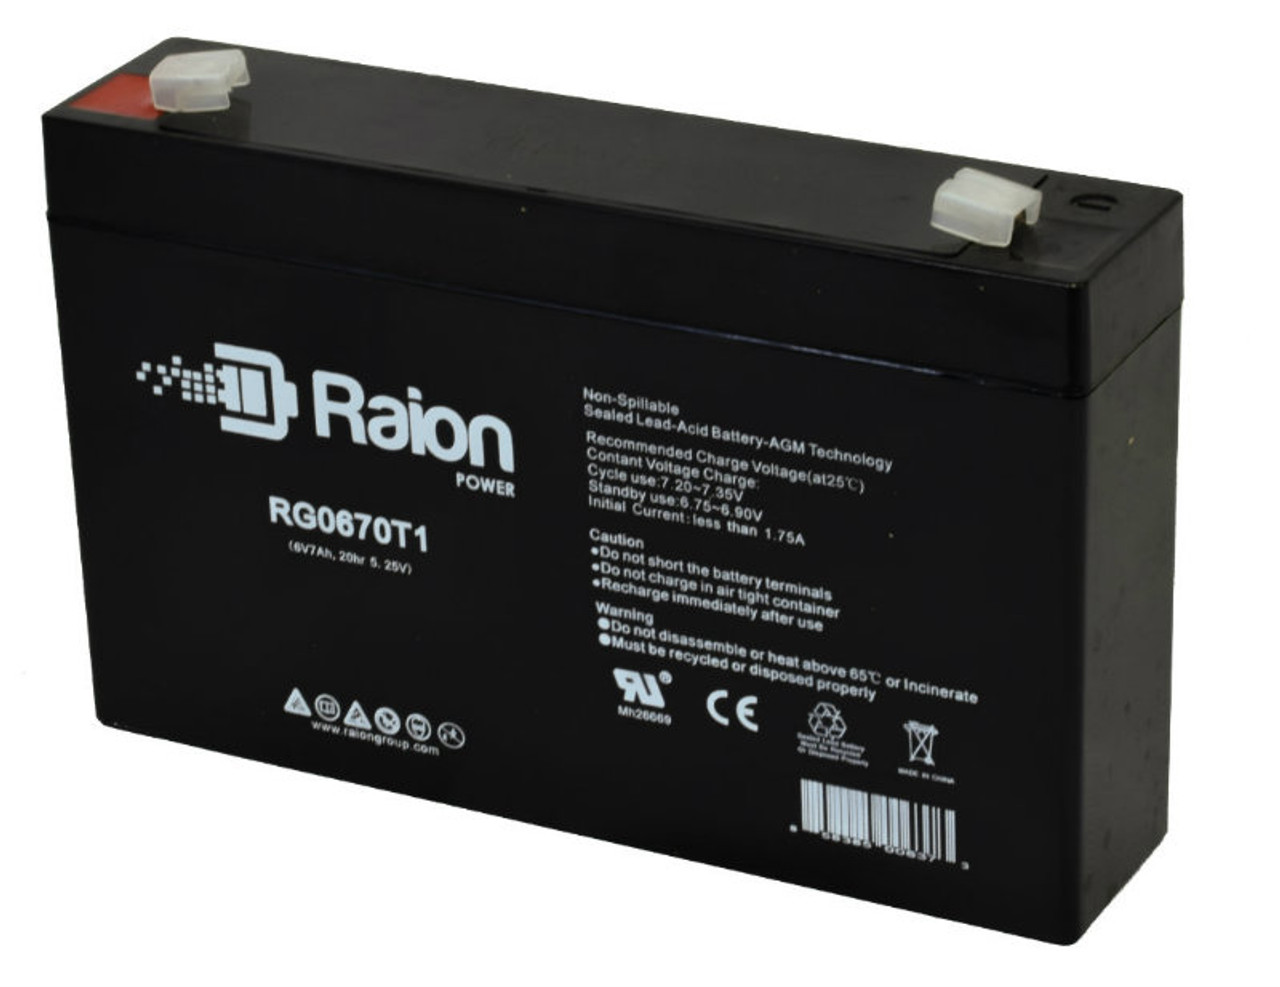 Raion Power RG0670T1 6V 7Ah Replacement Emergency Lighting Battery for IBT BT7.5-6